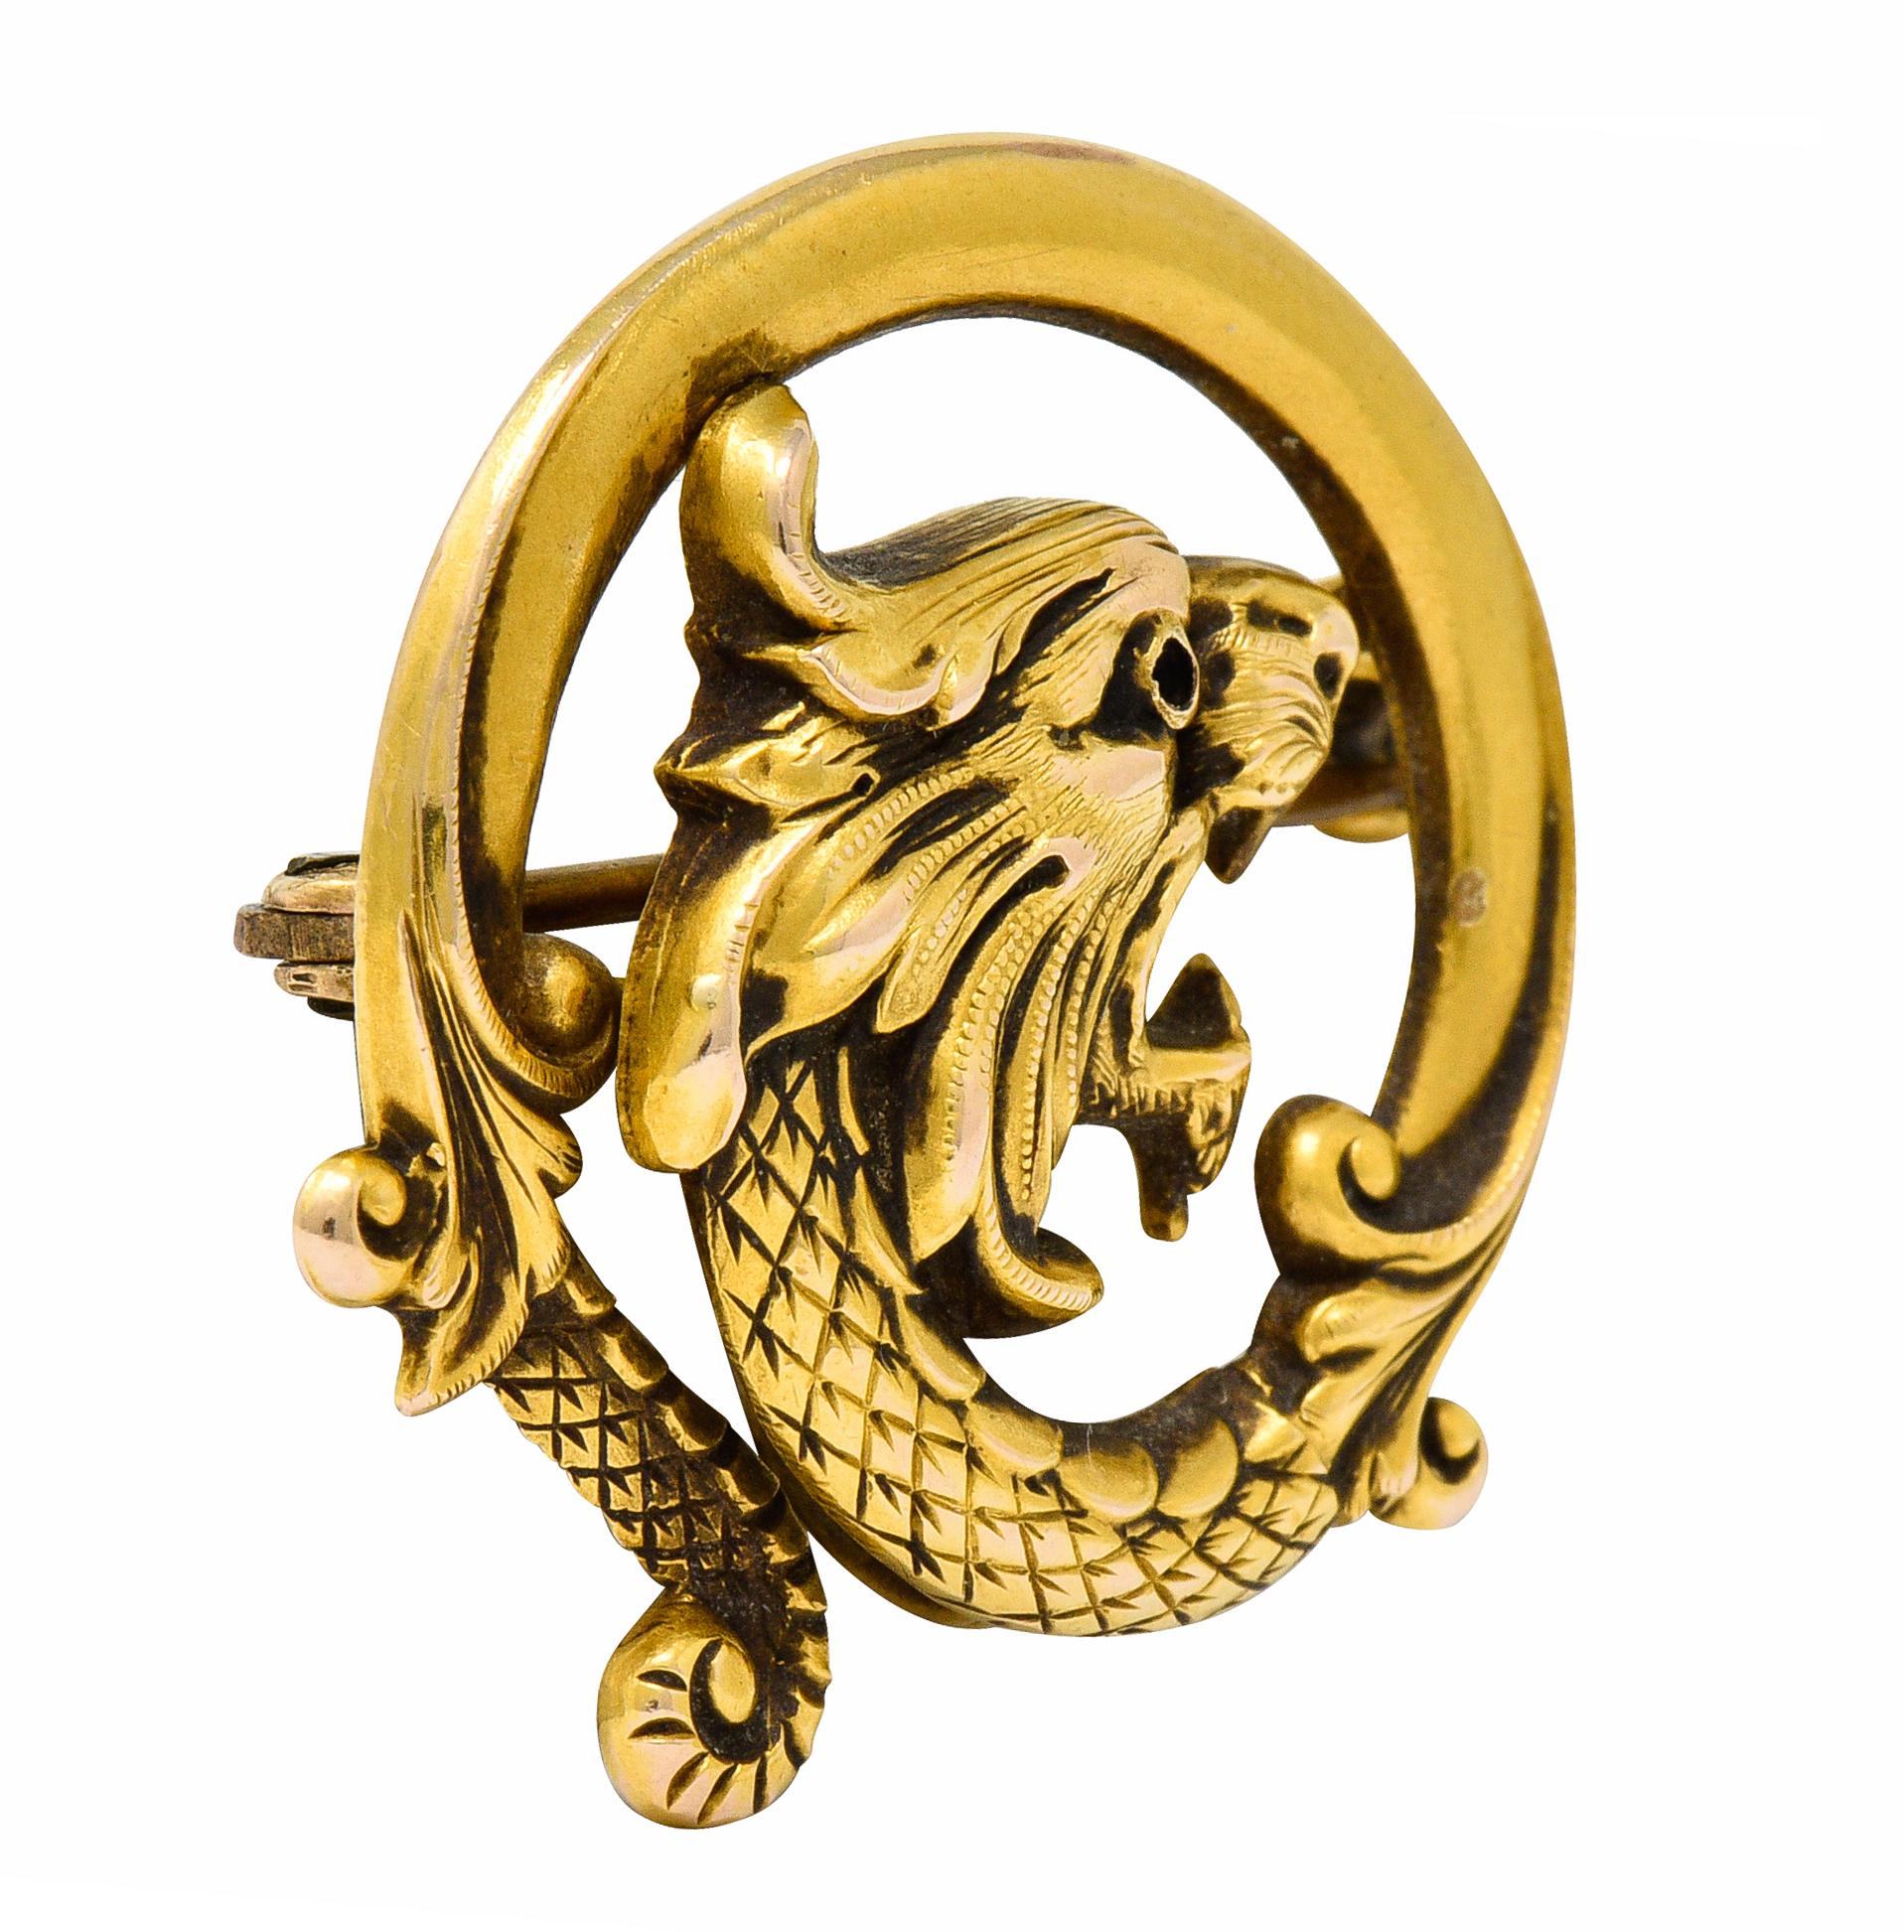 Brooch is designed as a highly rendered roaring lion face

Segueing into a spiraled surround of serpentine scales and foliate whiplash

Completed by a pin stem with closure

Maker's mark for Carter & Gough

Stamped 14K for 14 karat gold

Circa: